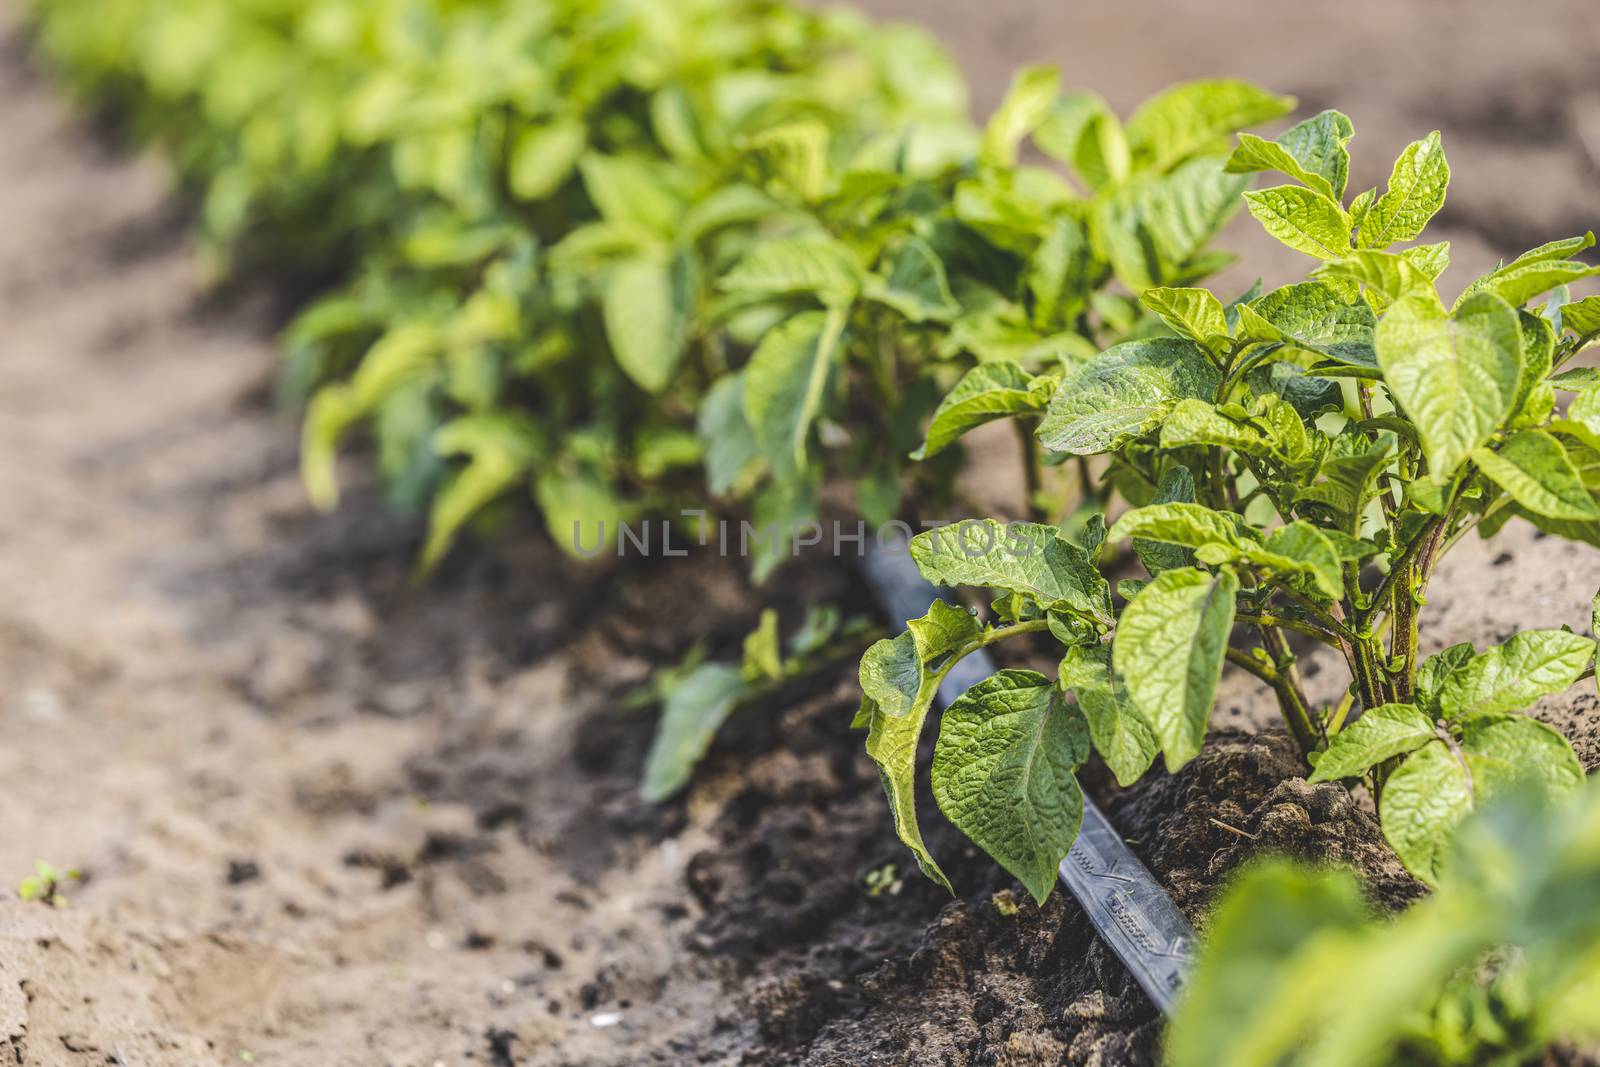 Cultivation of potatoes with drip irrigation. Growing spud, phot by ArtSvitlyna